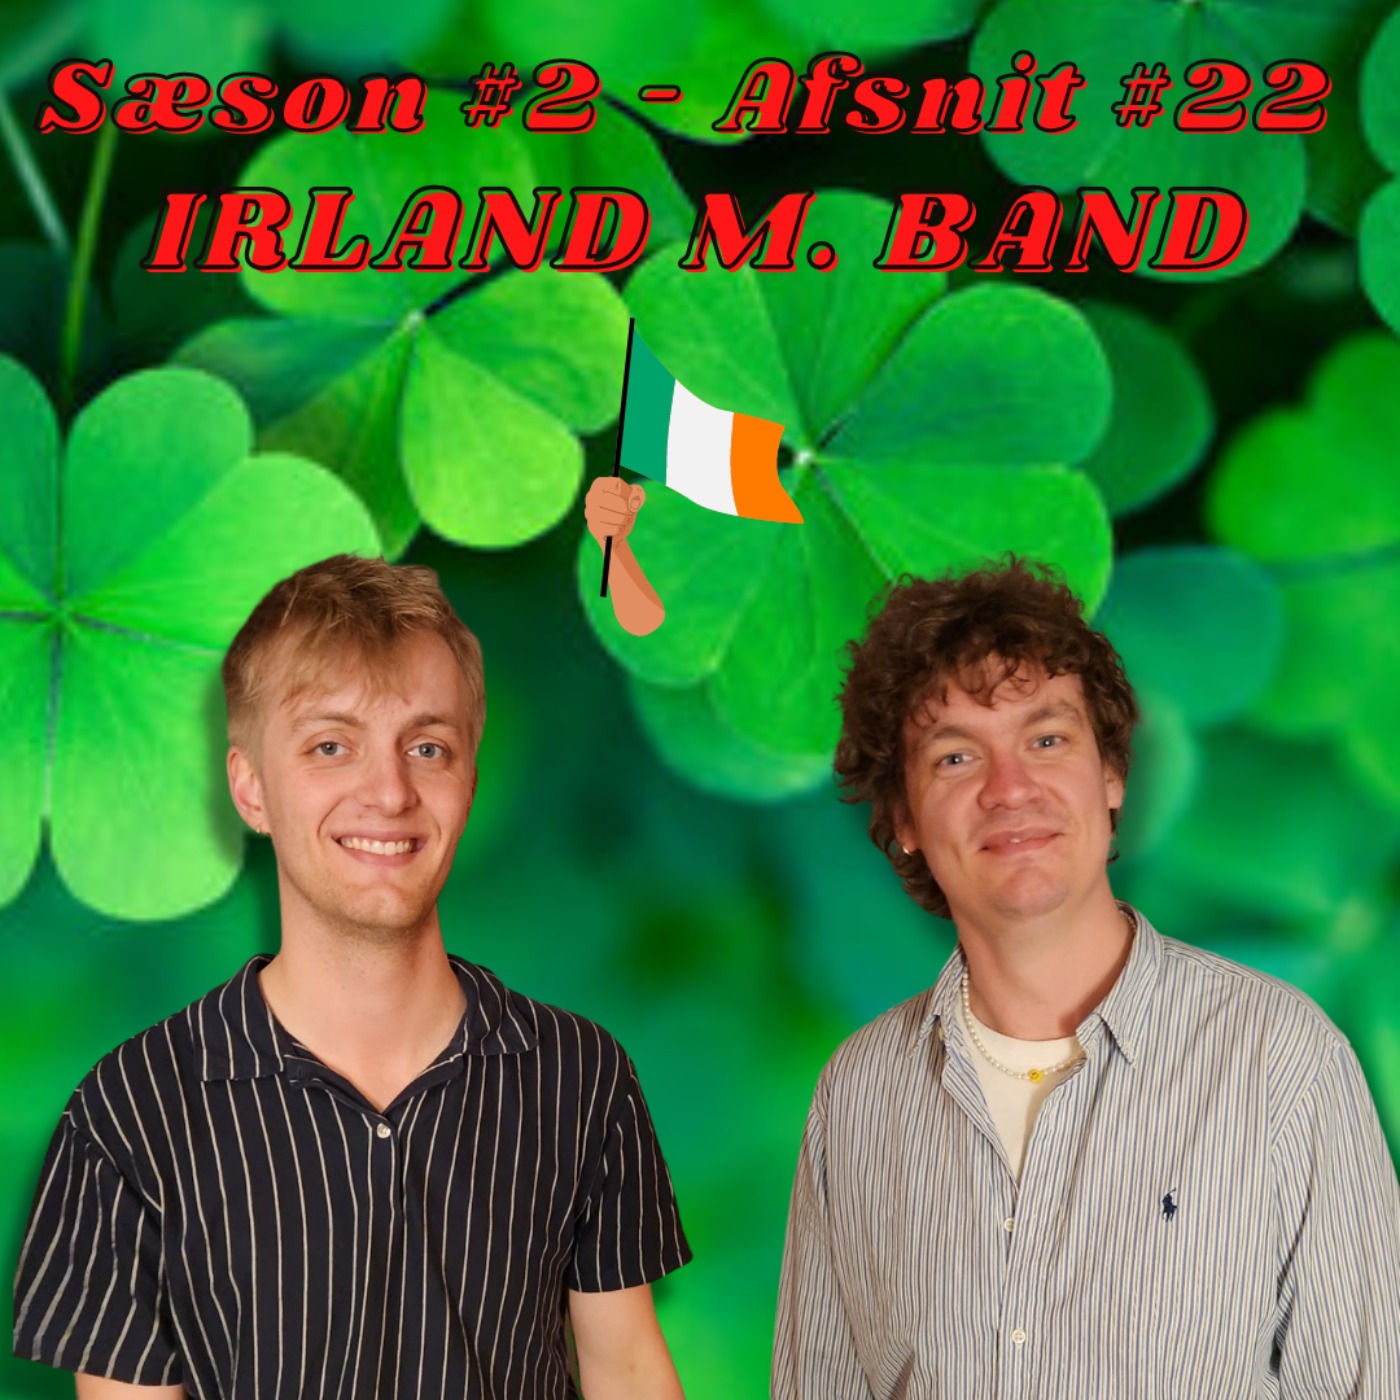 cover art for S02 E22 - Irland m. Band